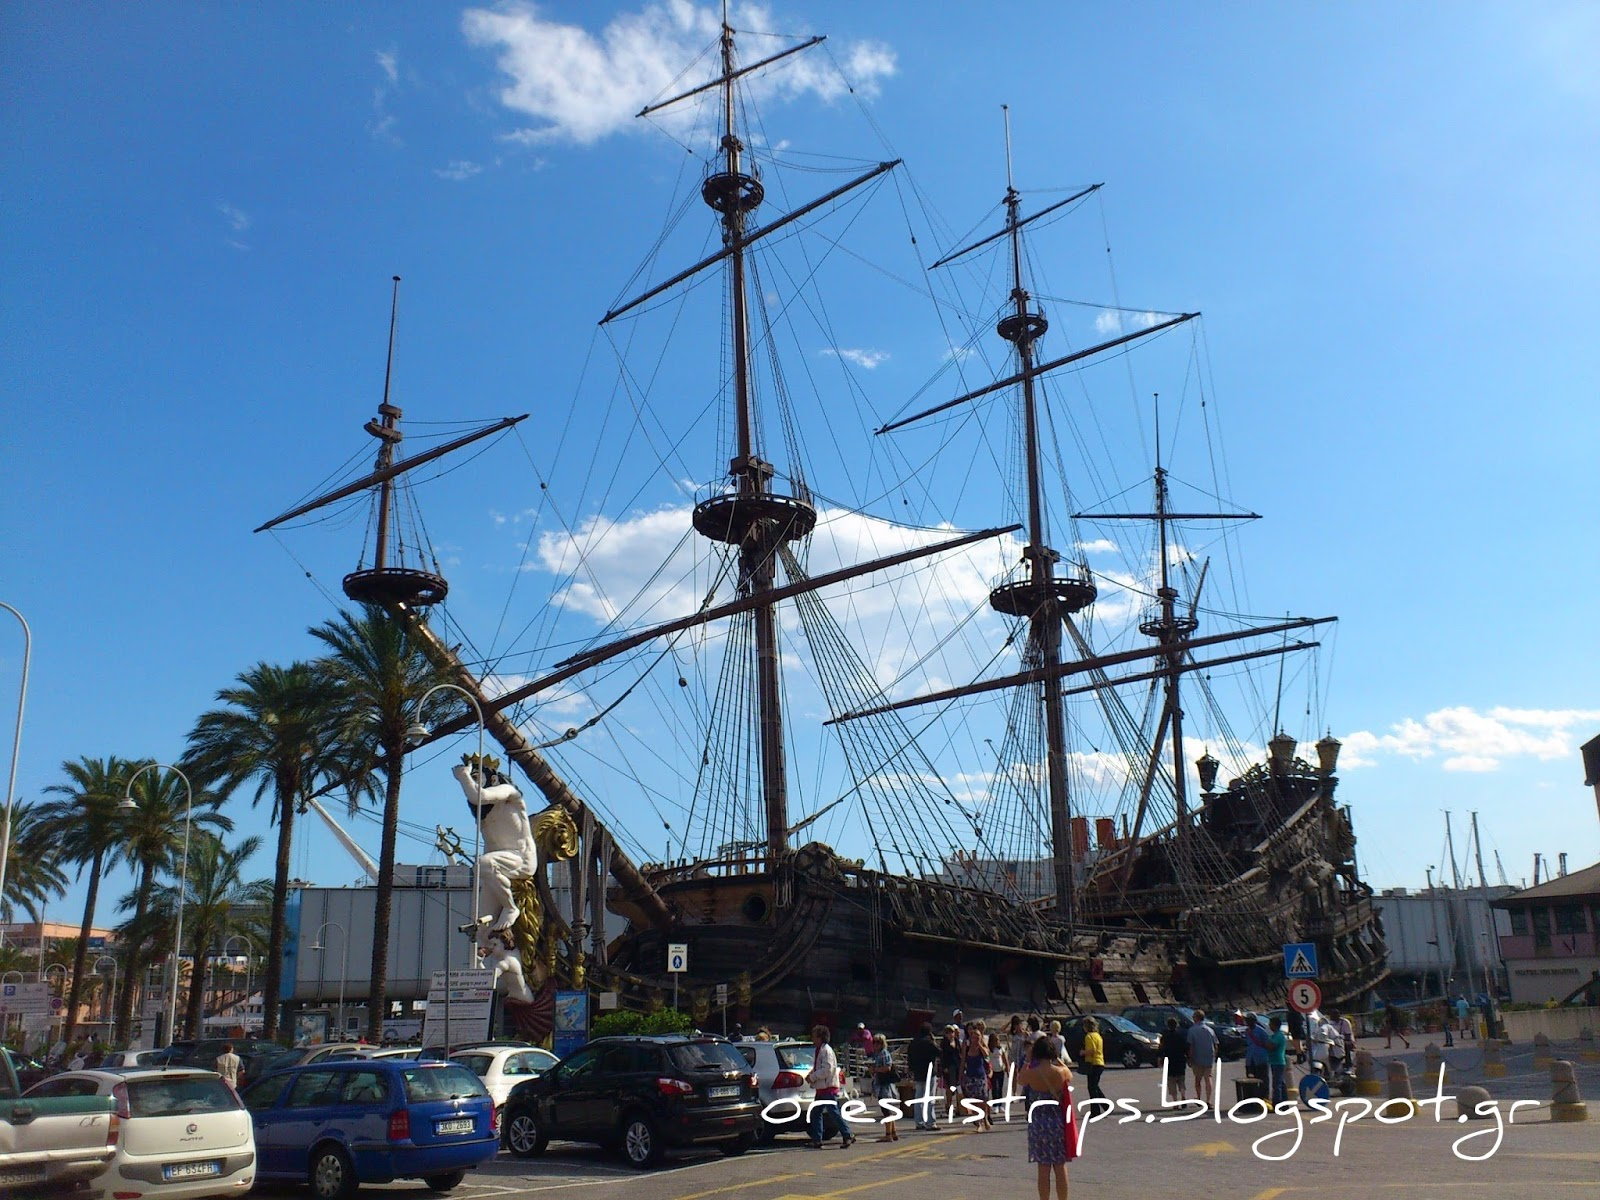 This one played in Polanski’s ”Pirates”. A copy of a Spanish ship 17thB.C., built in 1985